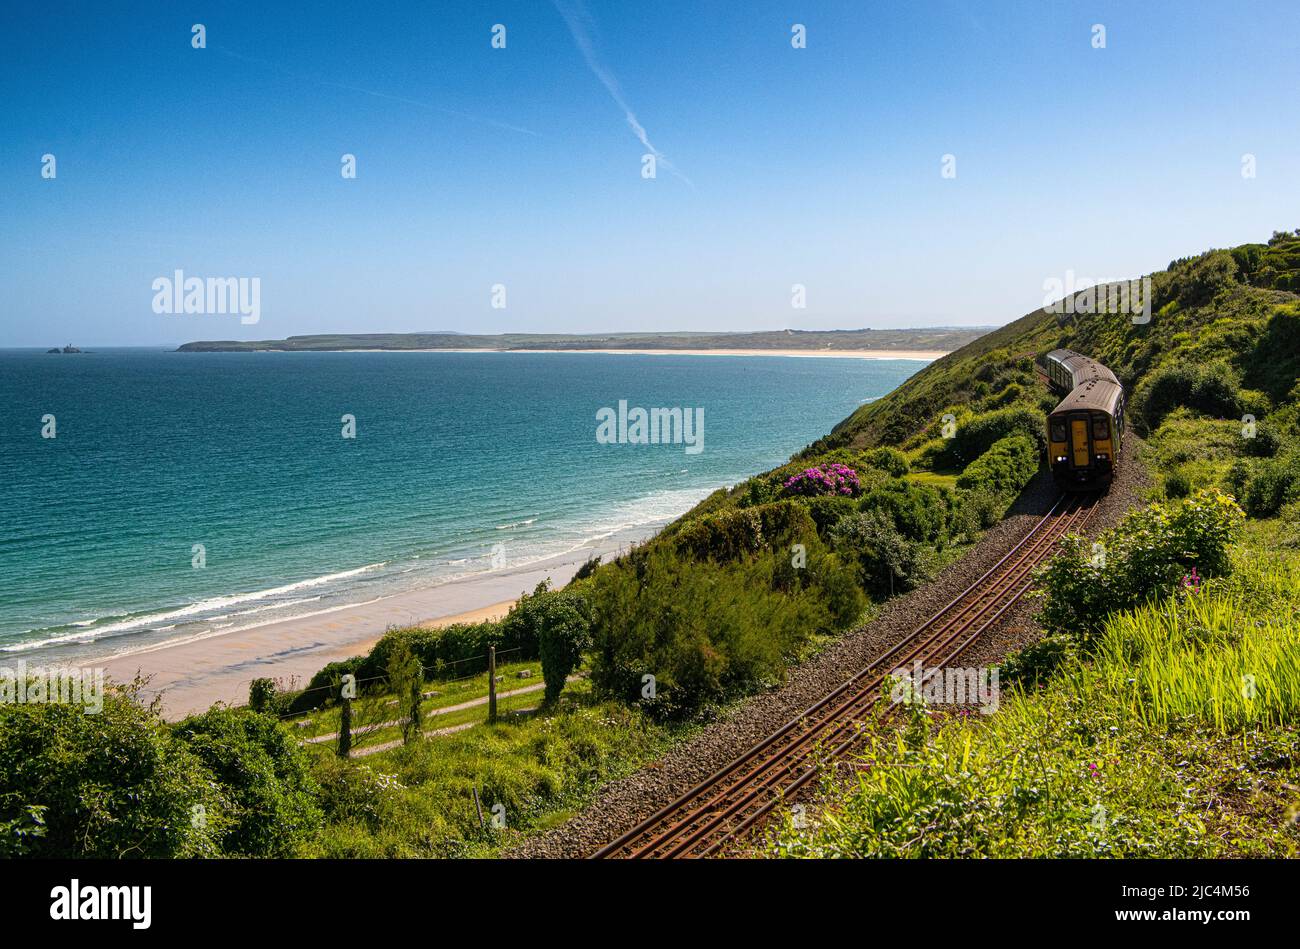 The train journey to St Ives is one of the most scenic in Britain. Enjoy spectacular views as the line sweeps along the coast Stock Photo